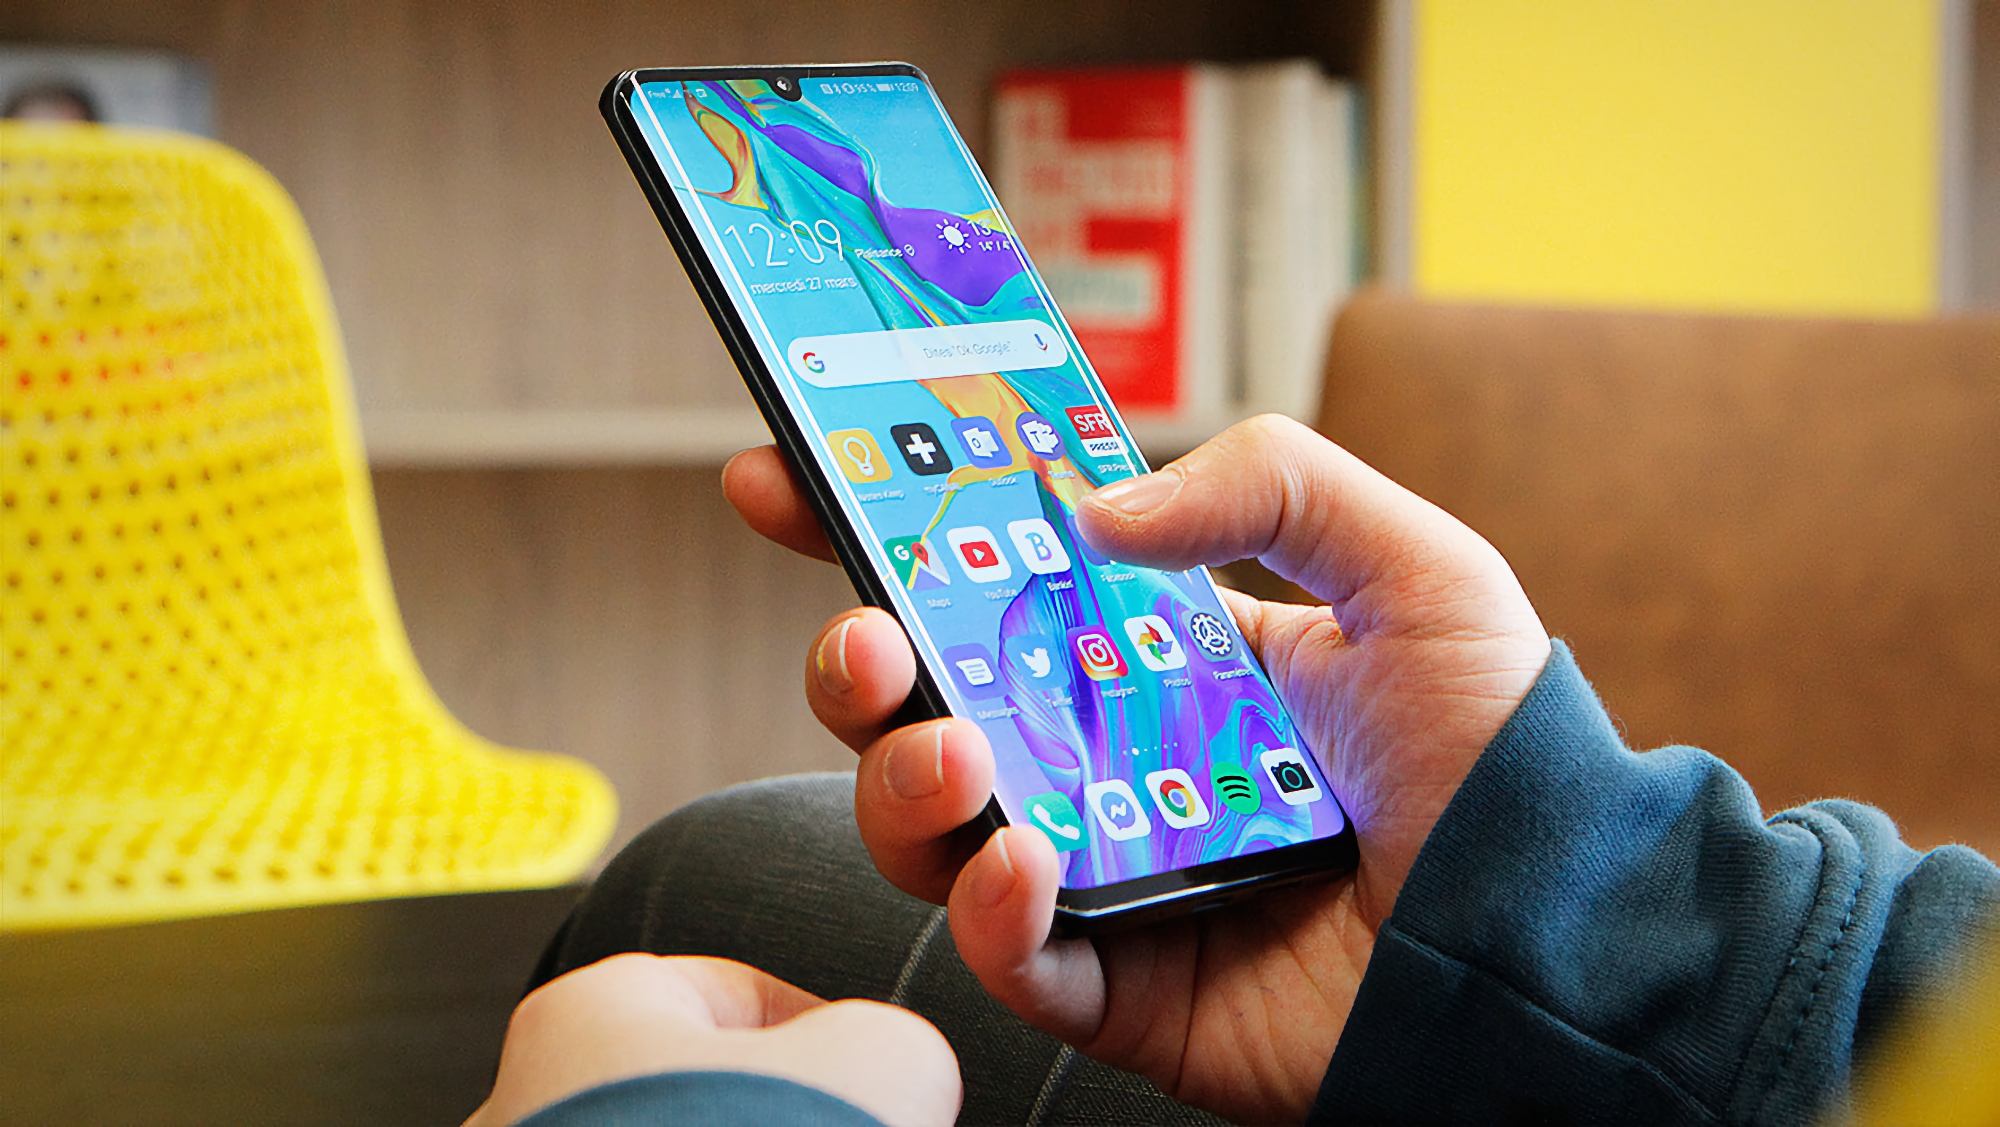 When will the stable version EMUI 12 for Huawei P30 and Huawei P30 Pro come out?